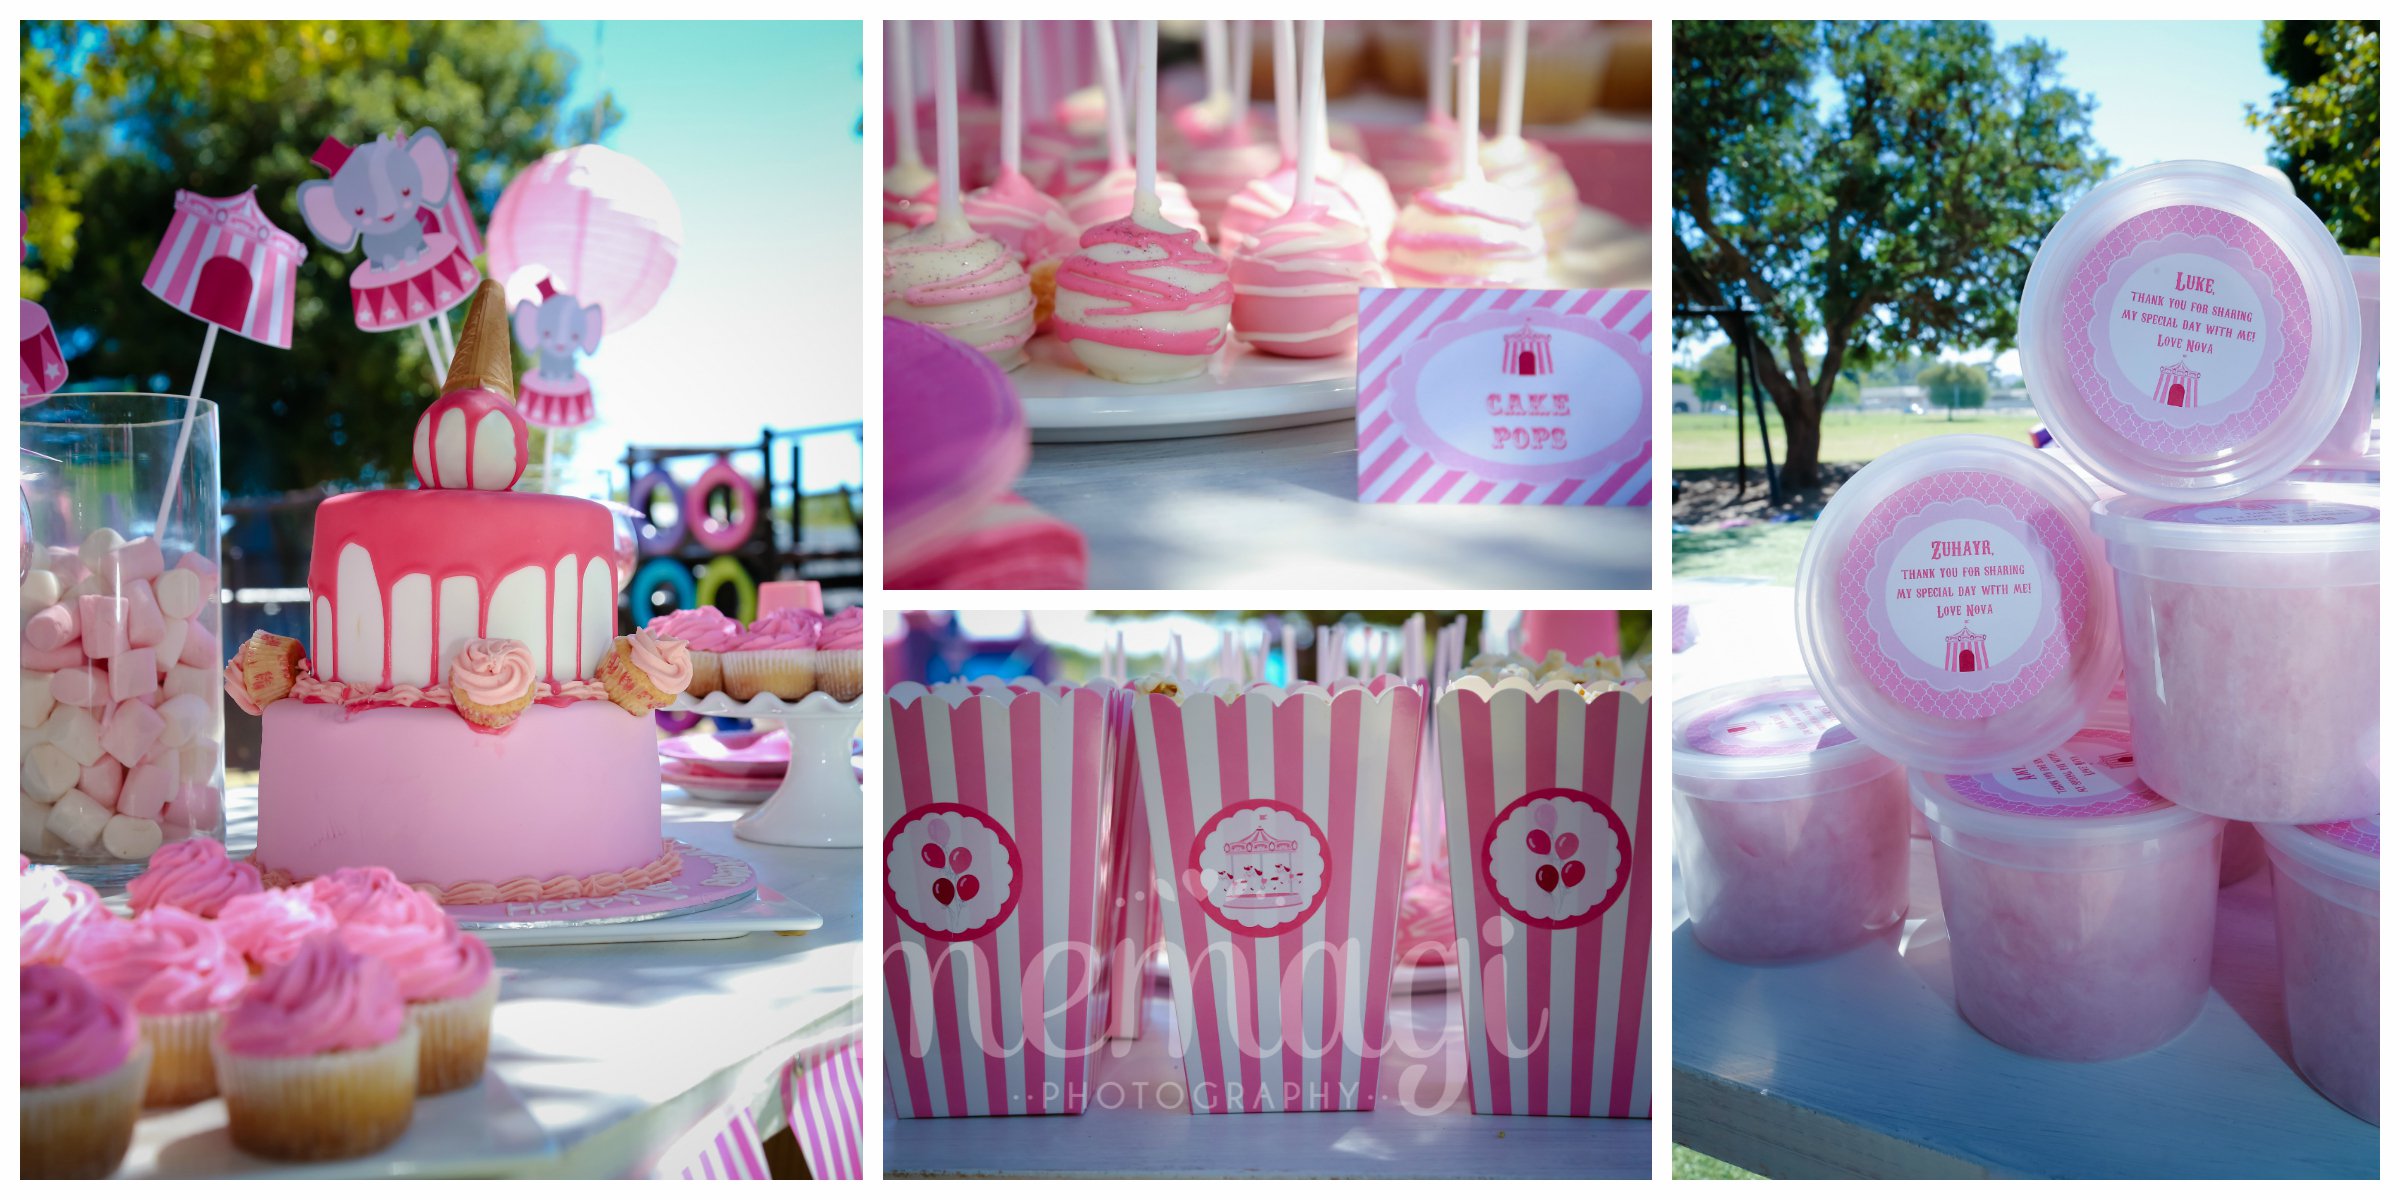 Carnival Kids Party Idea| MeMaGi Photography Cape Town| Things To Do With Kids